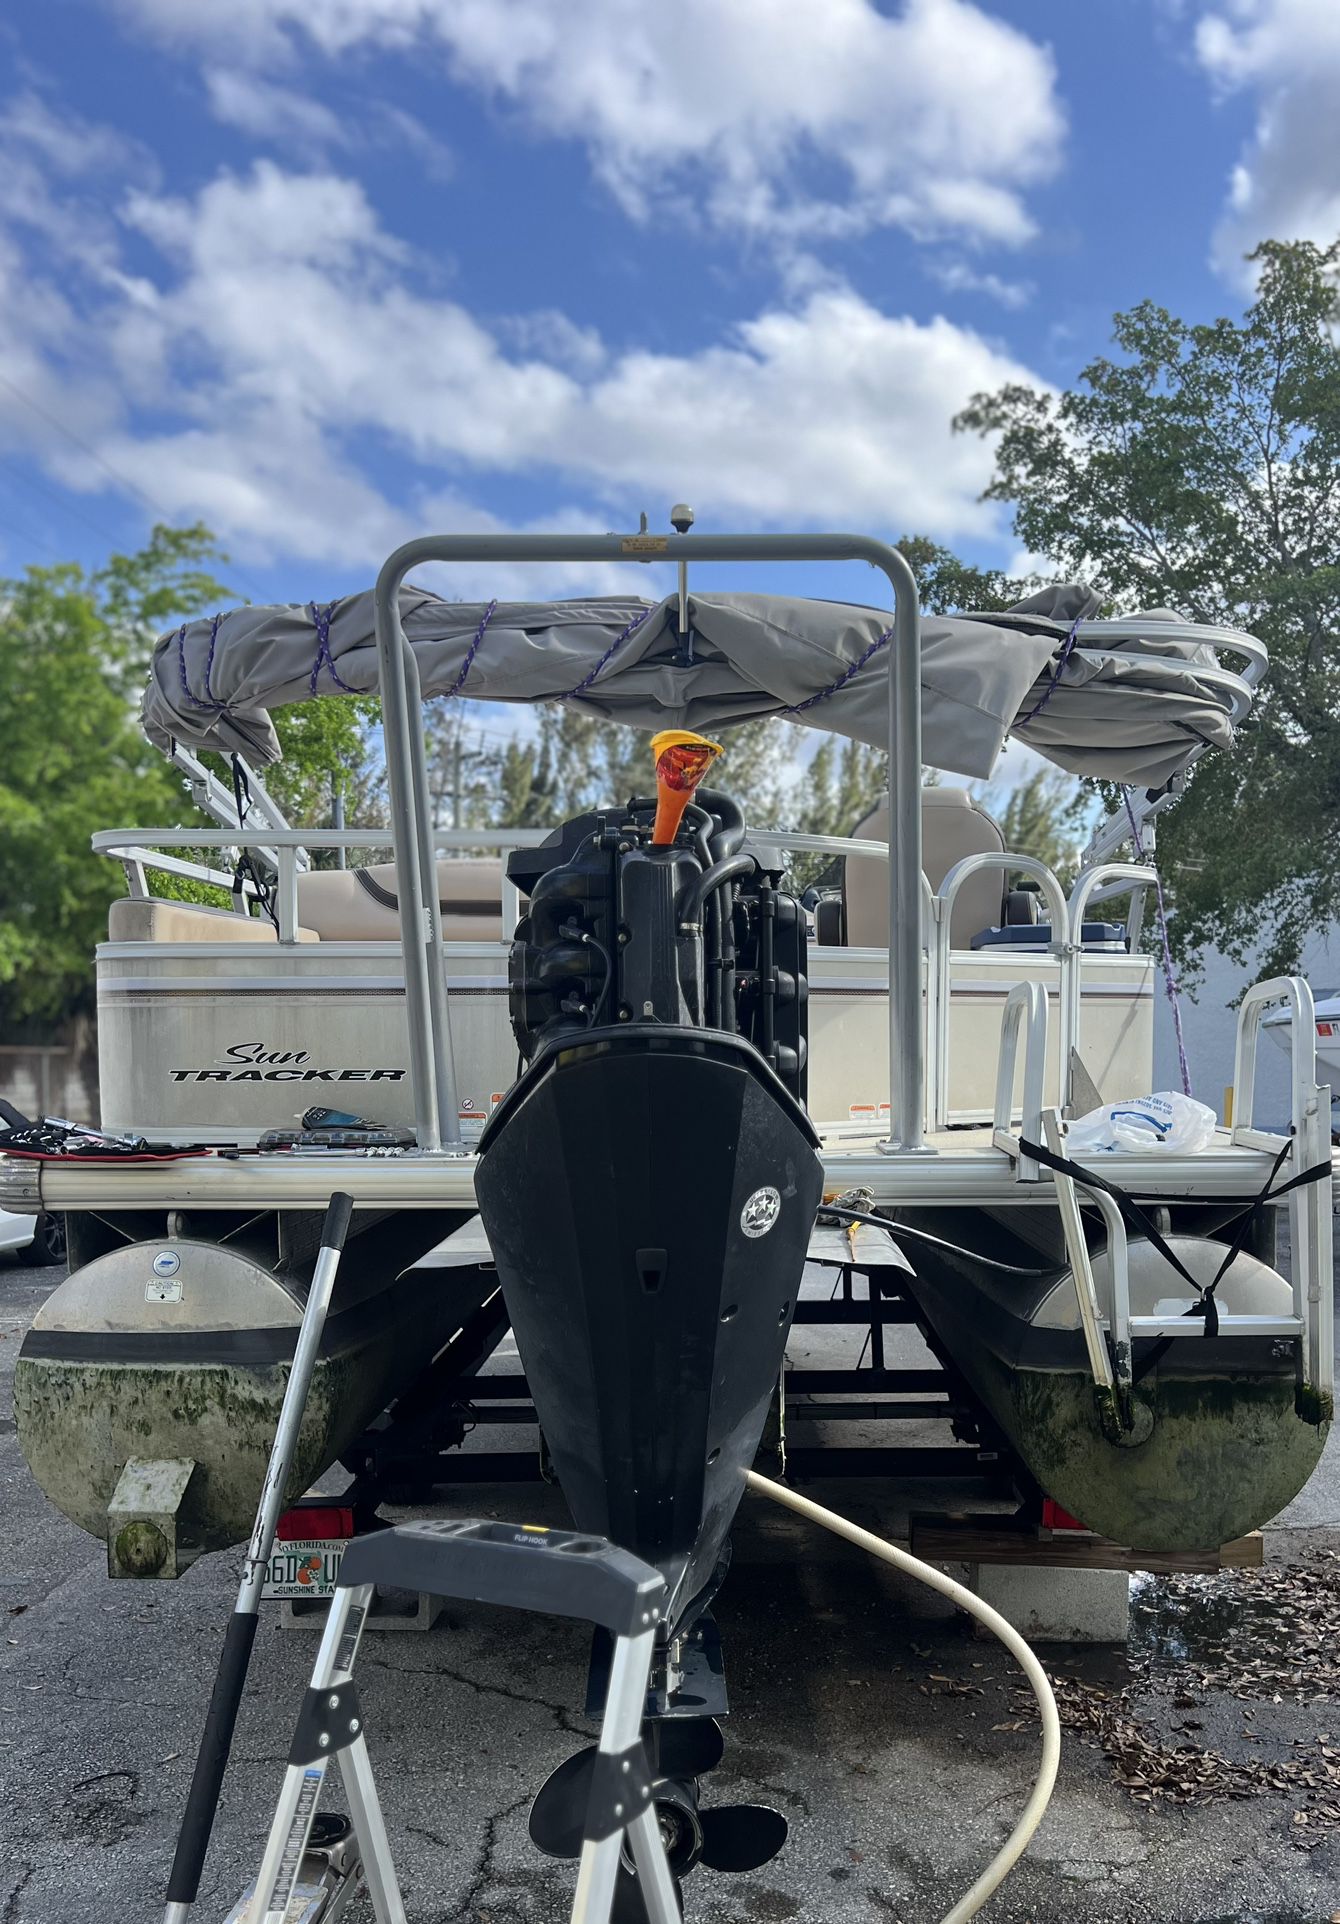 Boating equipment repair service, fixes and installations.